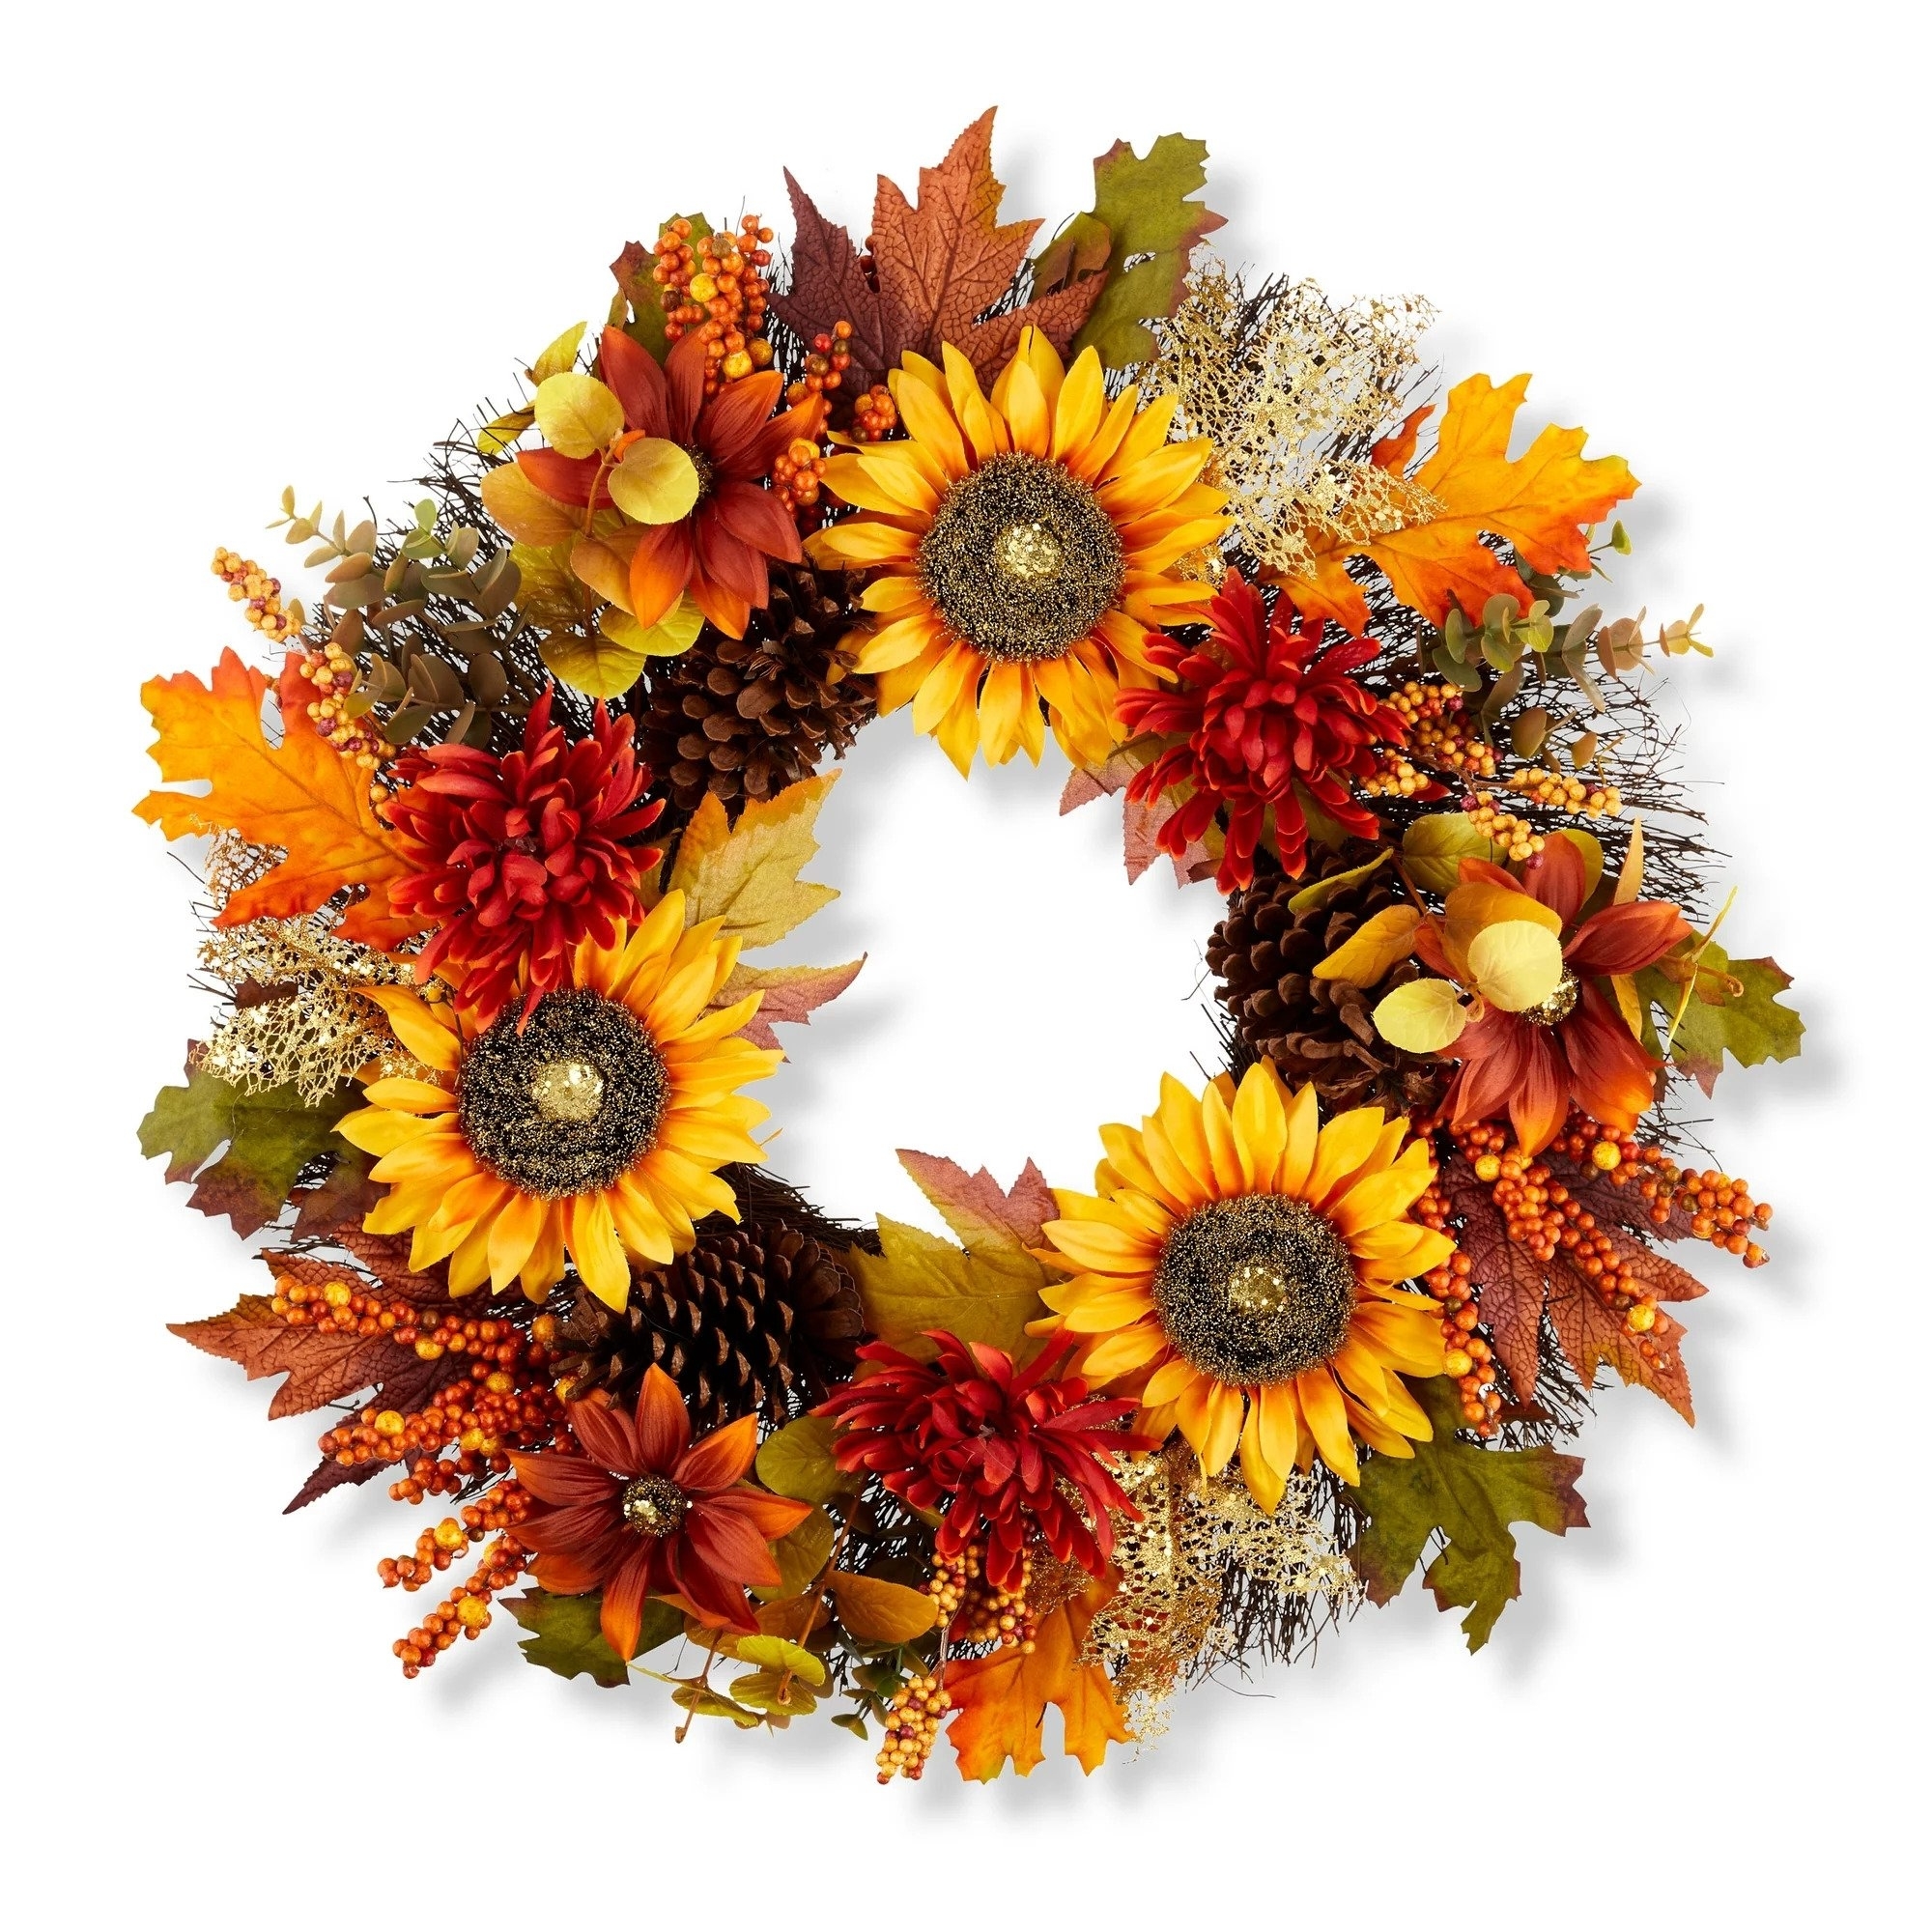 The wreath, featuring sunflowers, acorns, and other fall plants